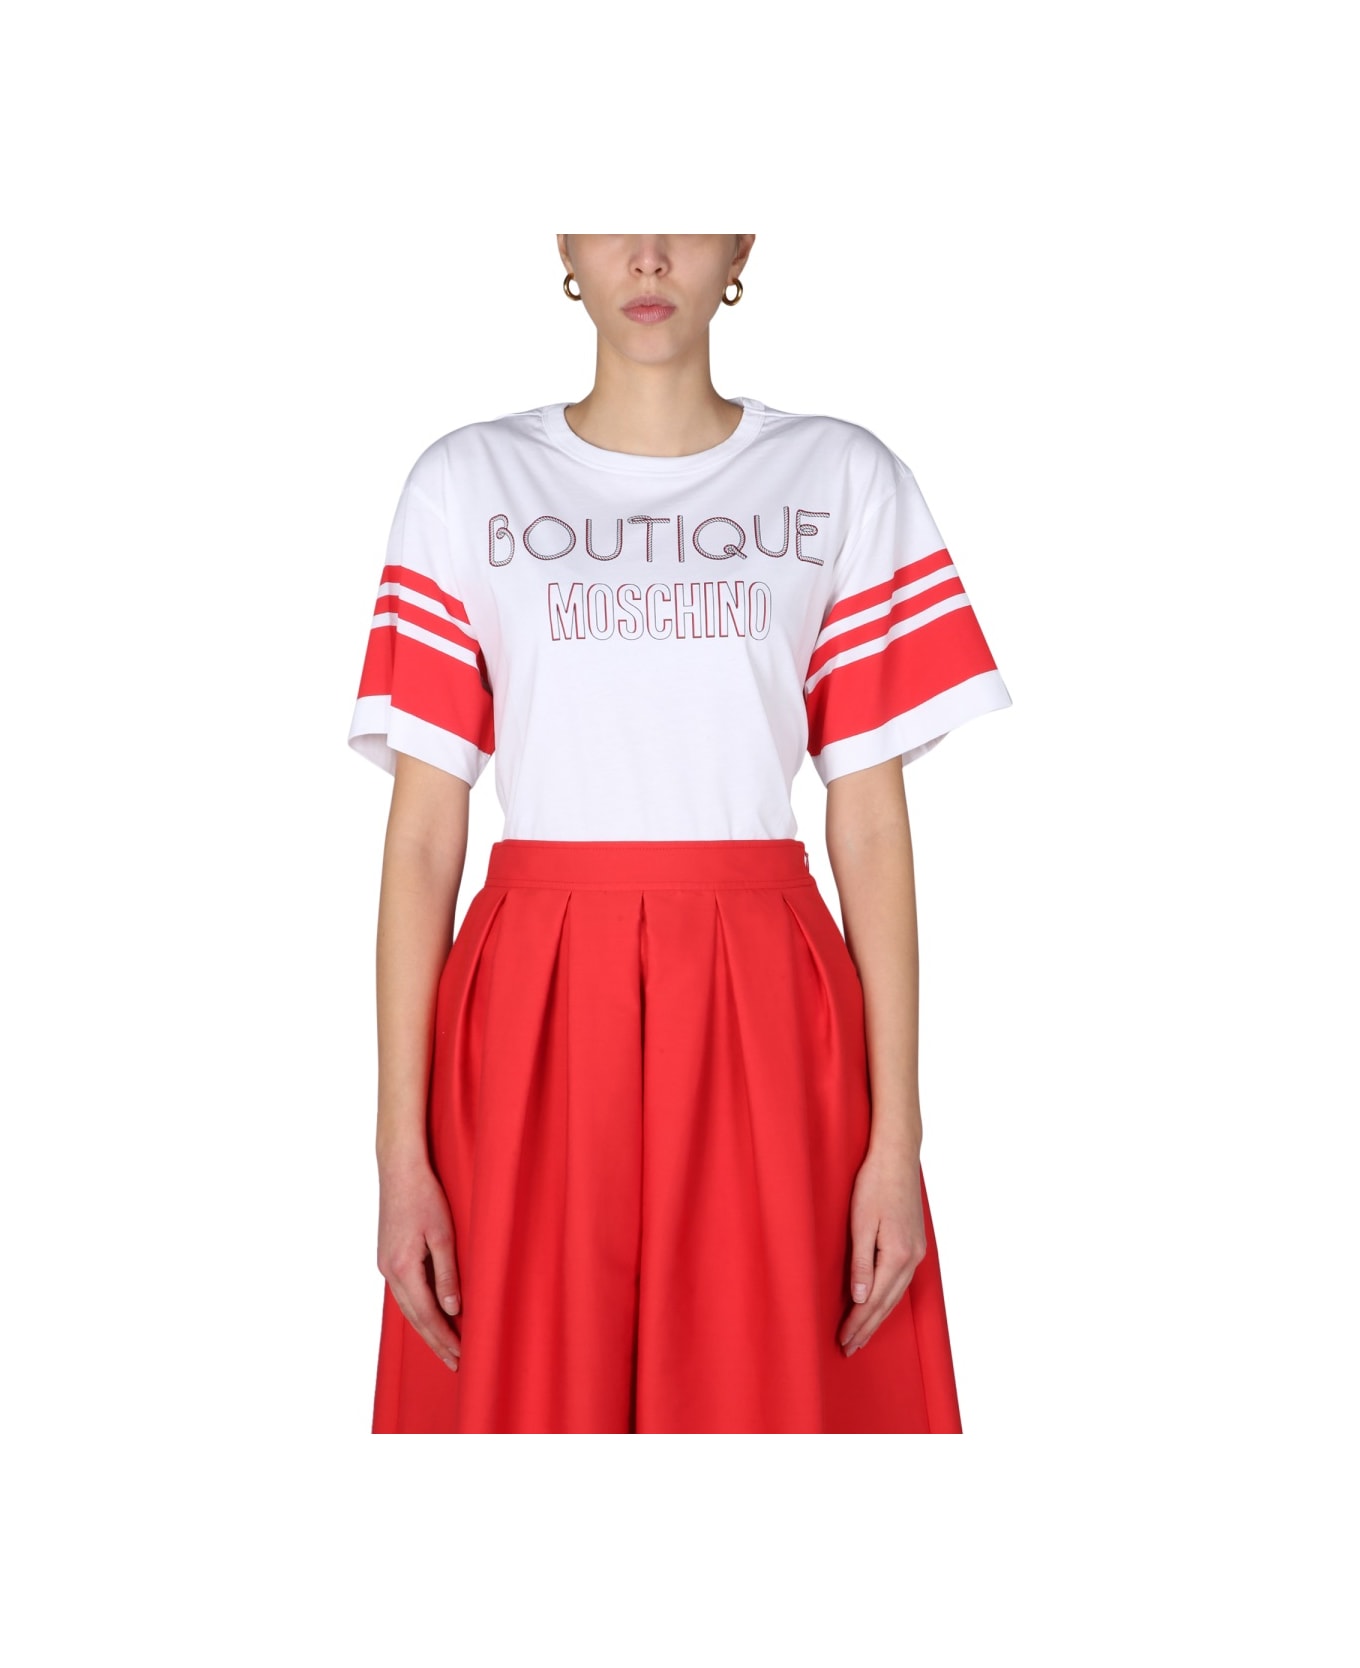 Boutique Moschino "sailor Mood" T-shirt - WHITE Tシャツ